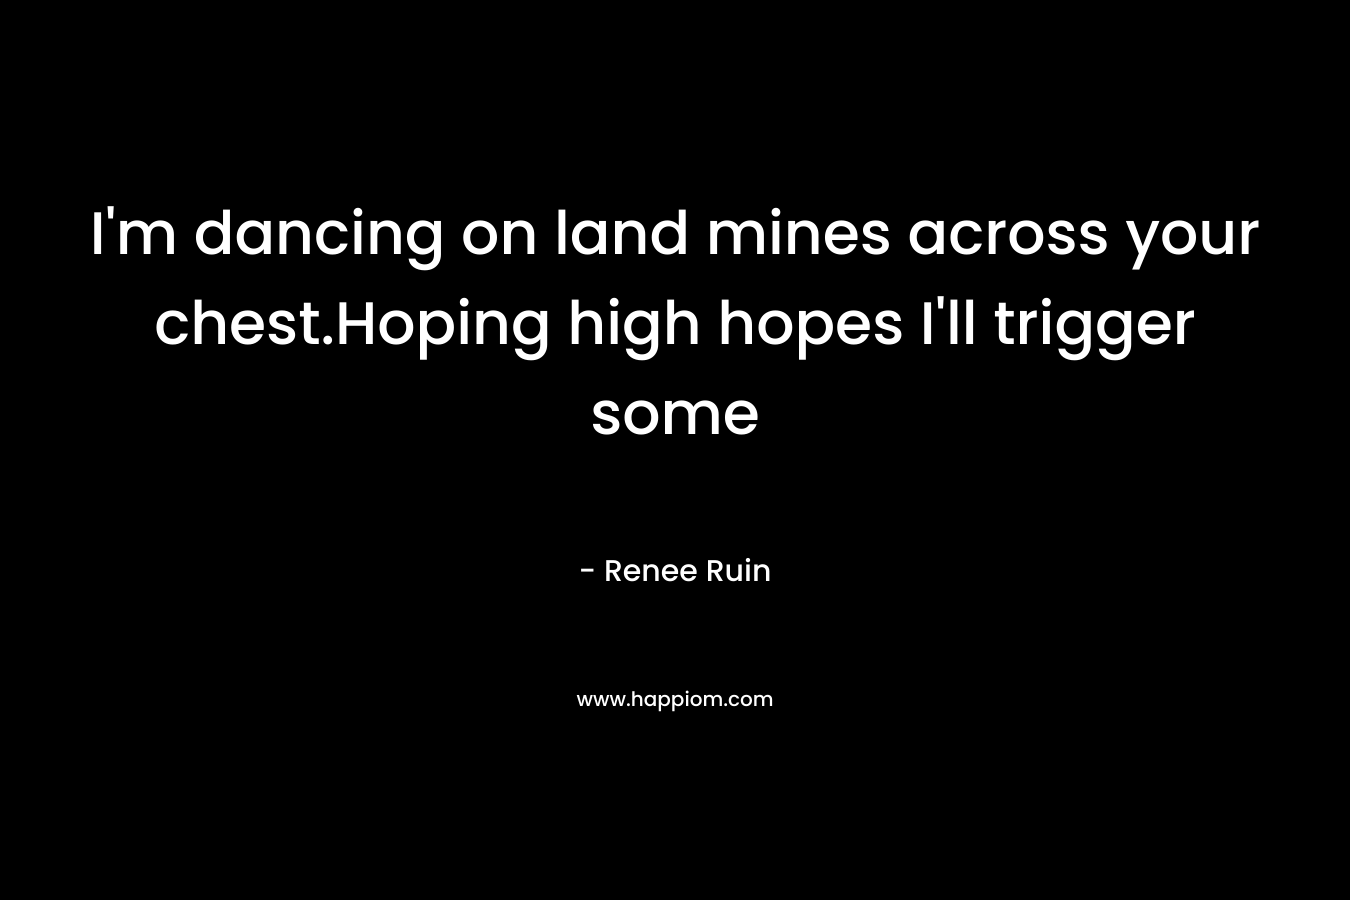 I’m dancing on land mines across your chest.Hoping high hopes I’ll trigger some – Renee Ruin